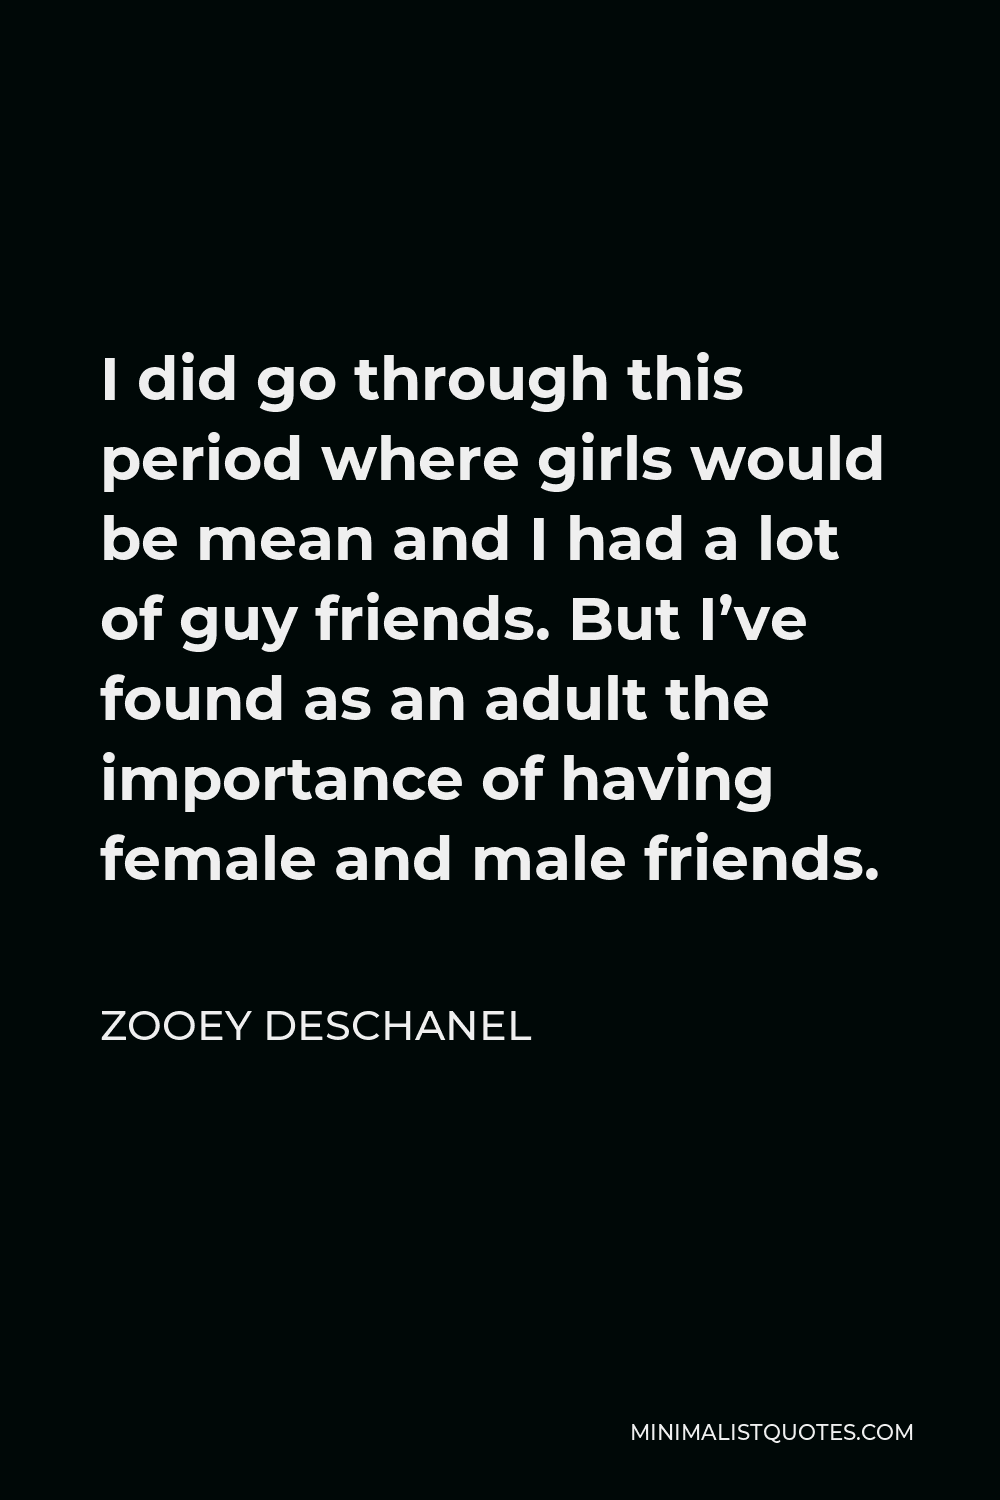 Zooey Deschanel Quote - I did go through this period where girls would be mean and I had a lot of guy friends. But I’ve found as an adult the importance of having female and male friends.